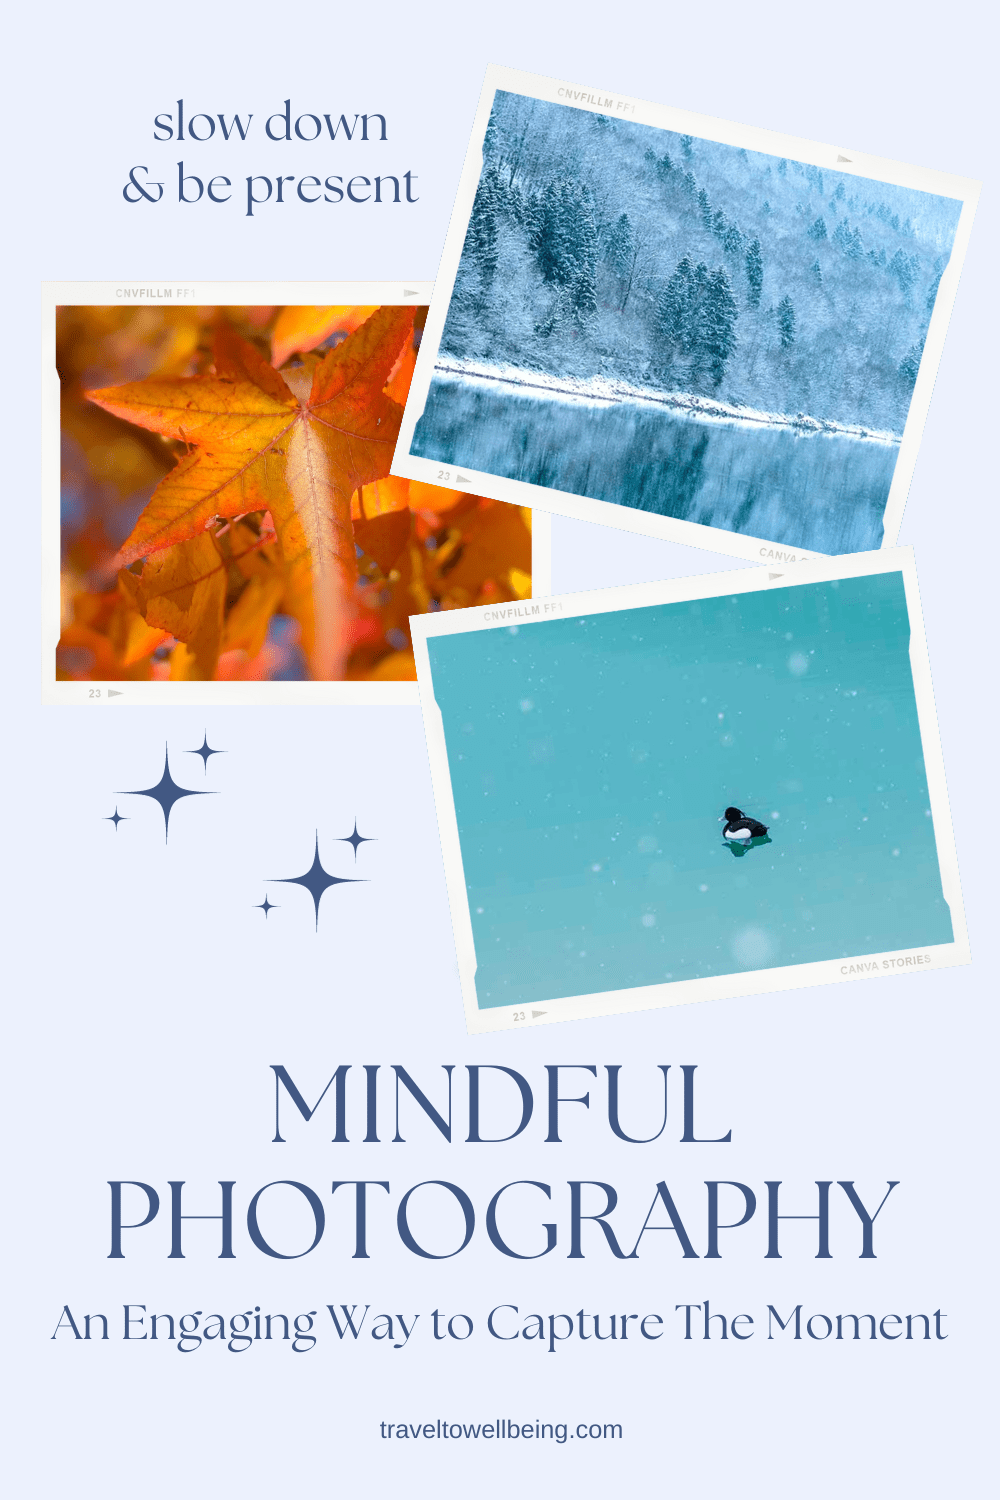 Mindful Photography: An Engaging Way to Capture The Moment